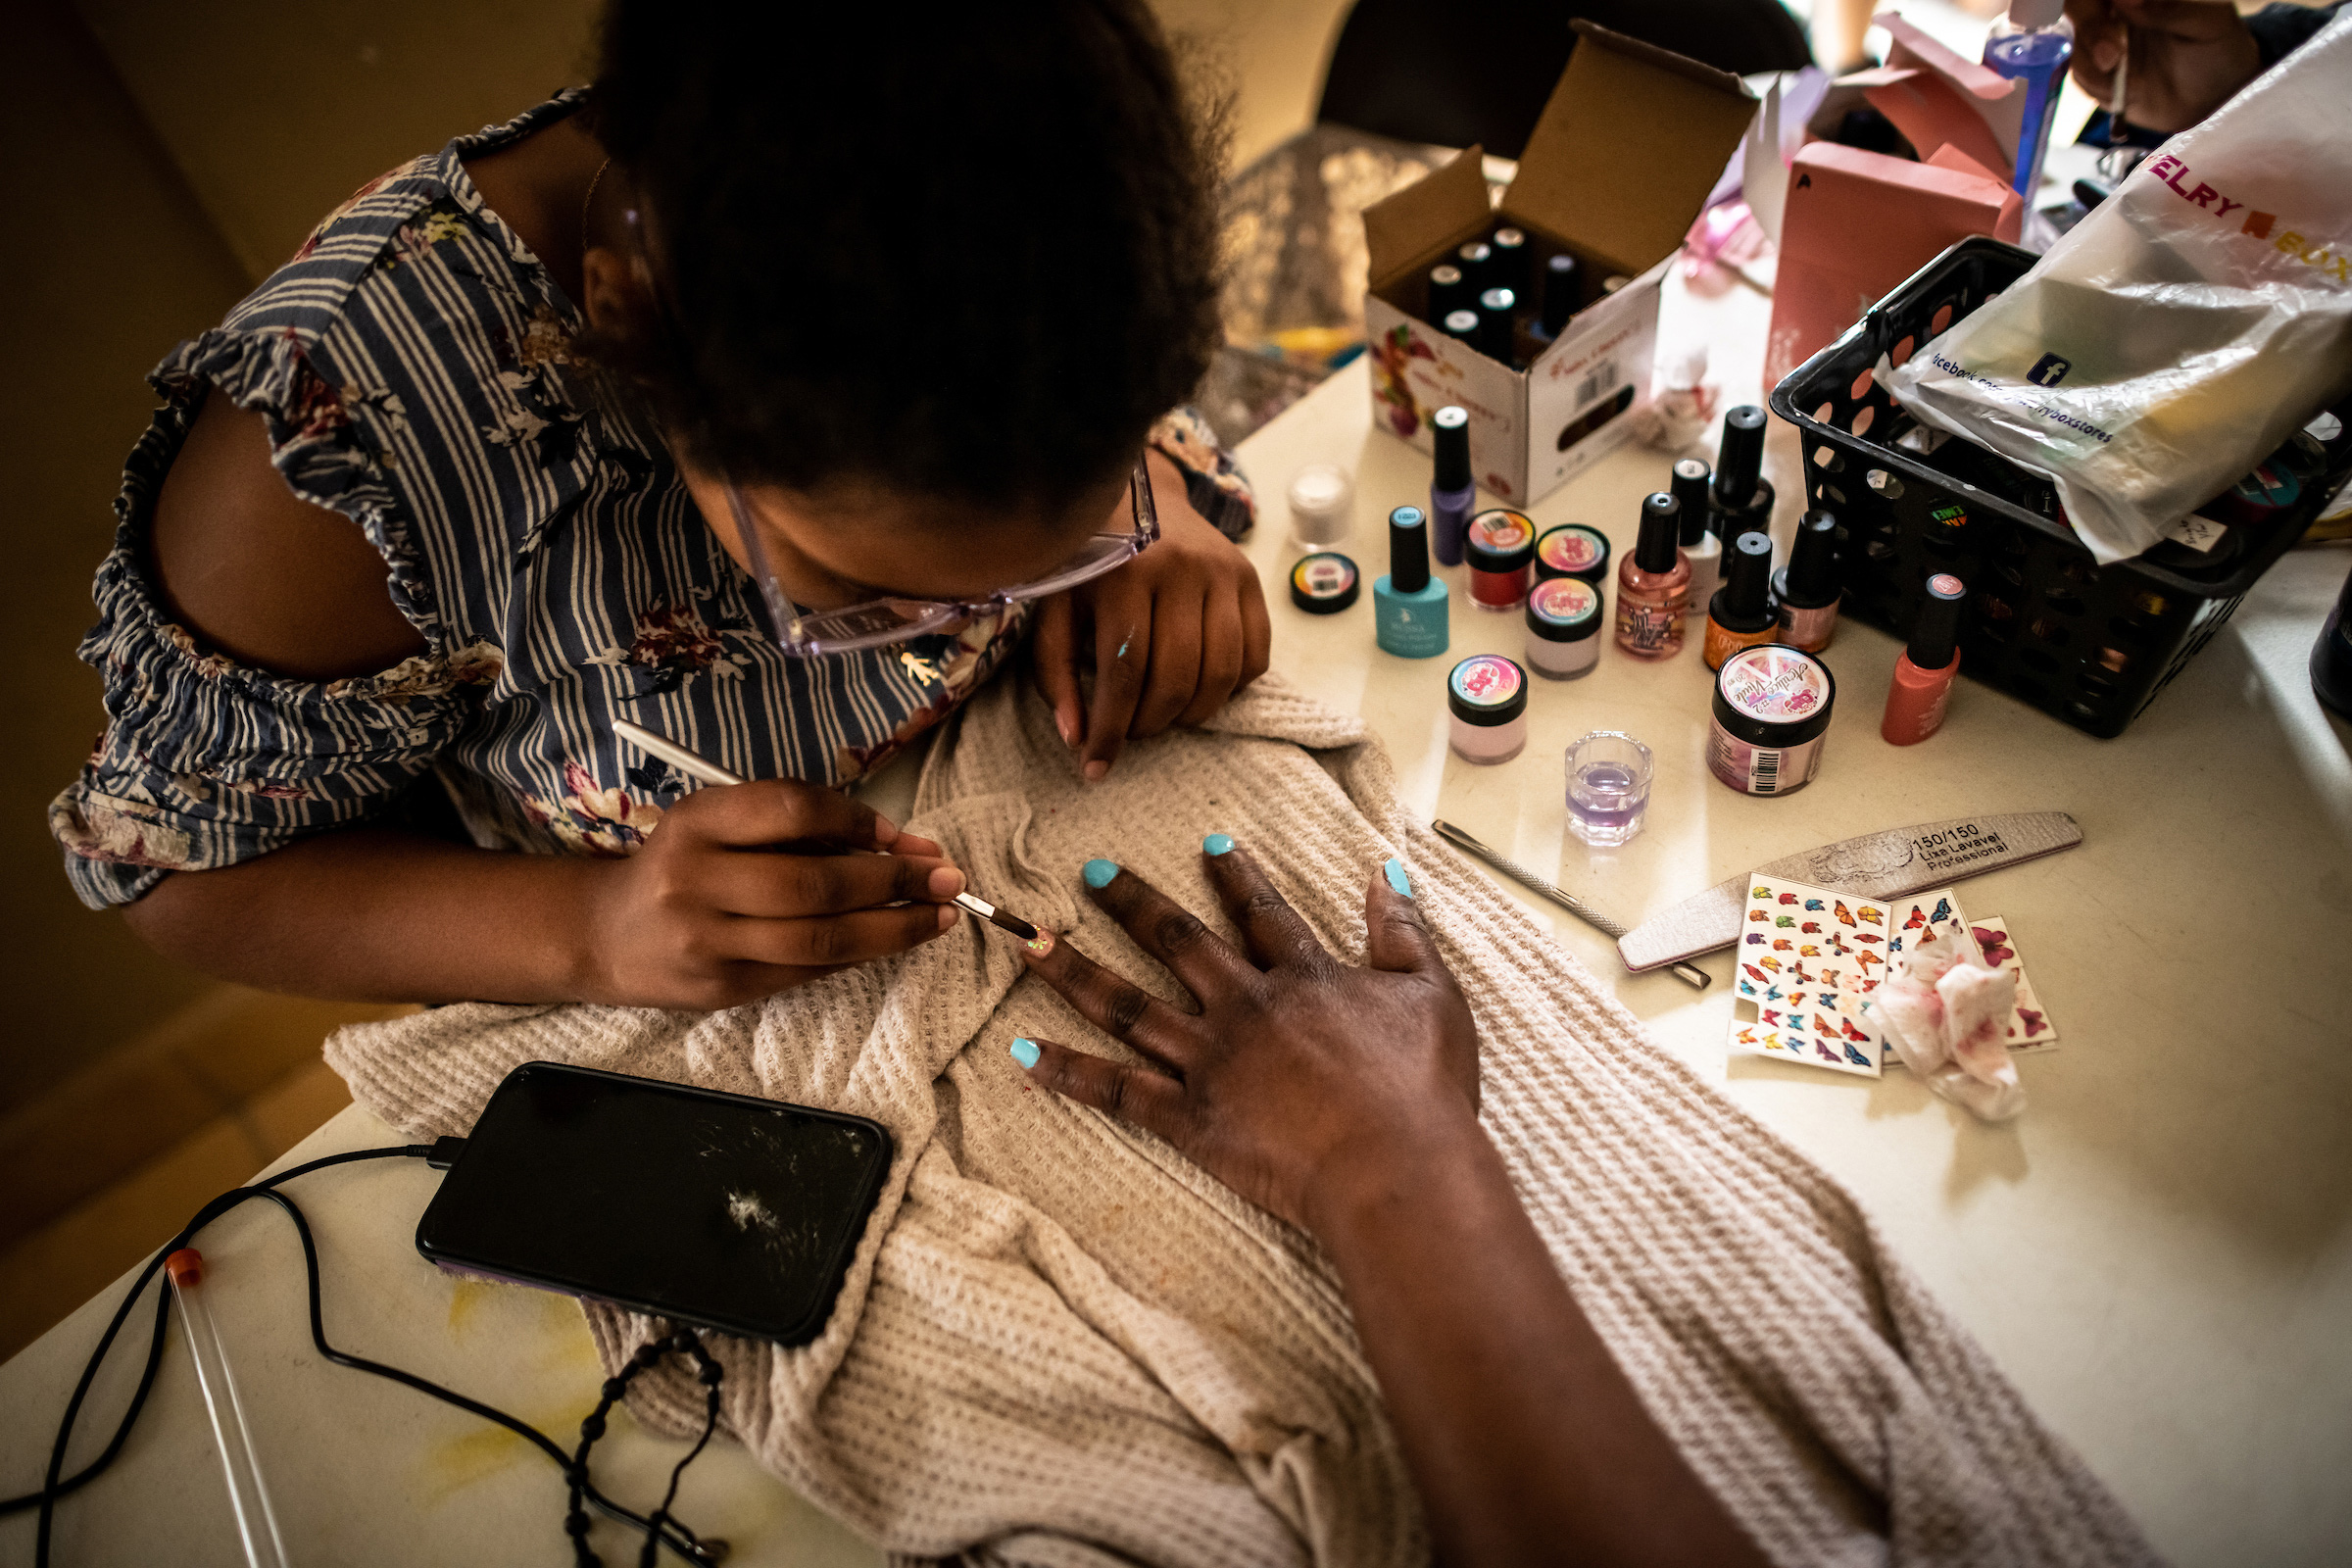 Migrants give each other gel manicures. Manicuring is one of the most accessible jobs migrant women can attain to earn an income in Ciudad Juárez. The shelter funds some women to get professional training, and then they share what they've learned by training other women at the shelter.